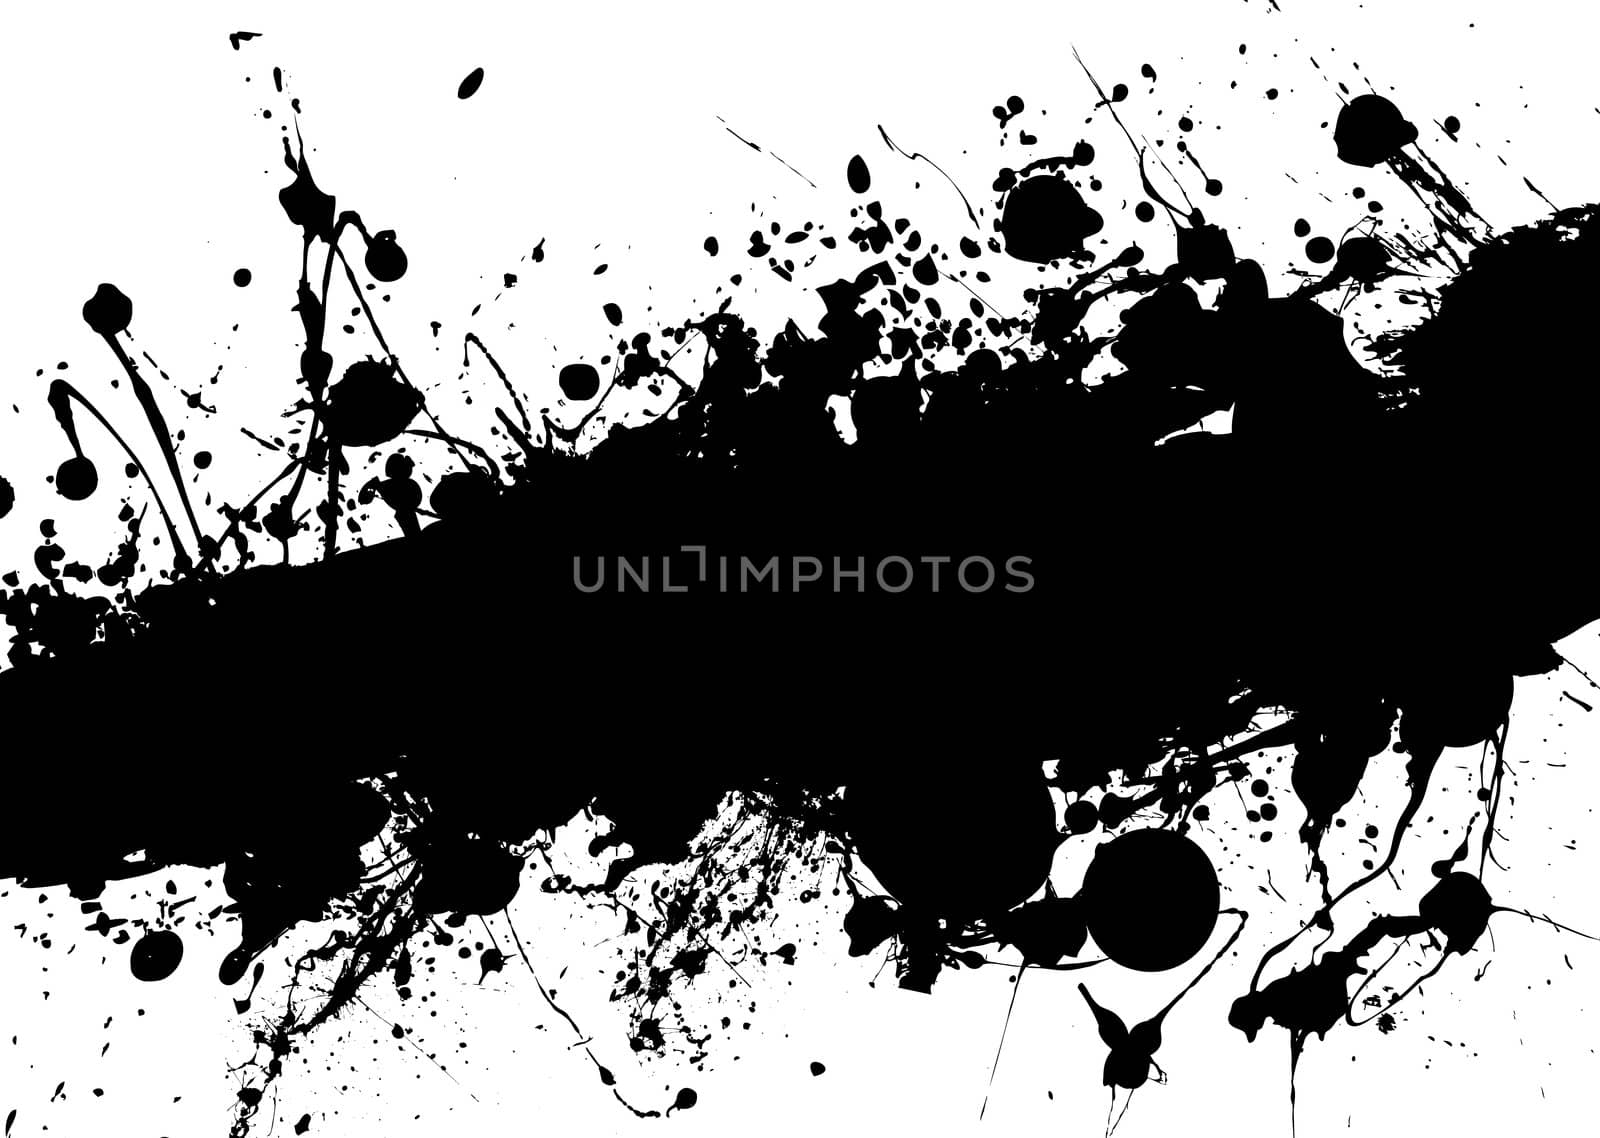 Black and white grunge image with room to add your own text